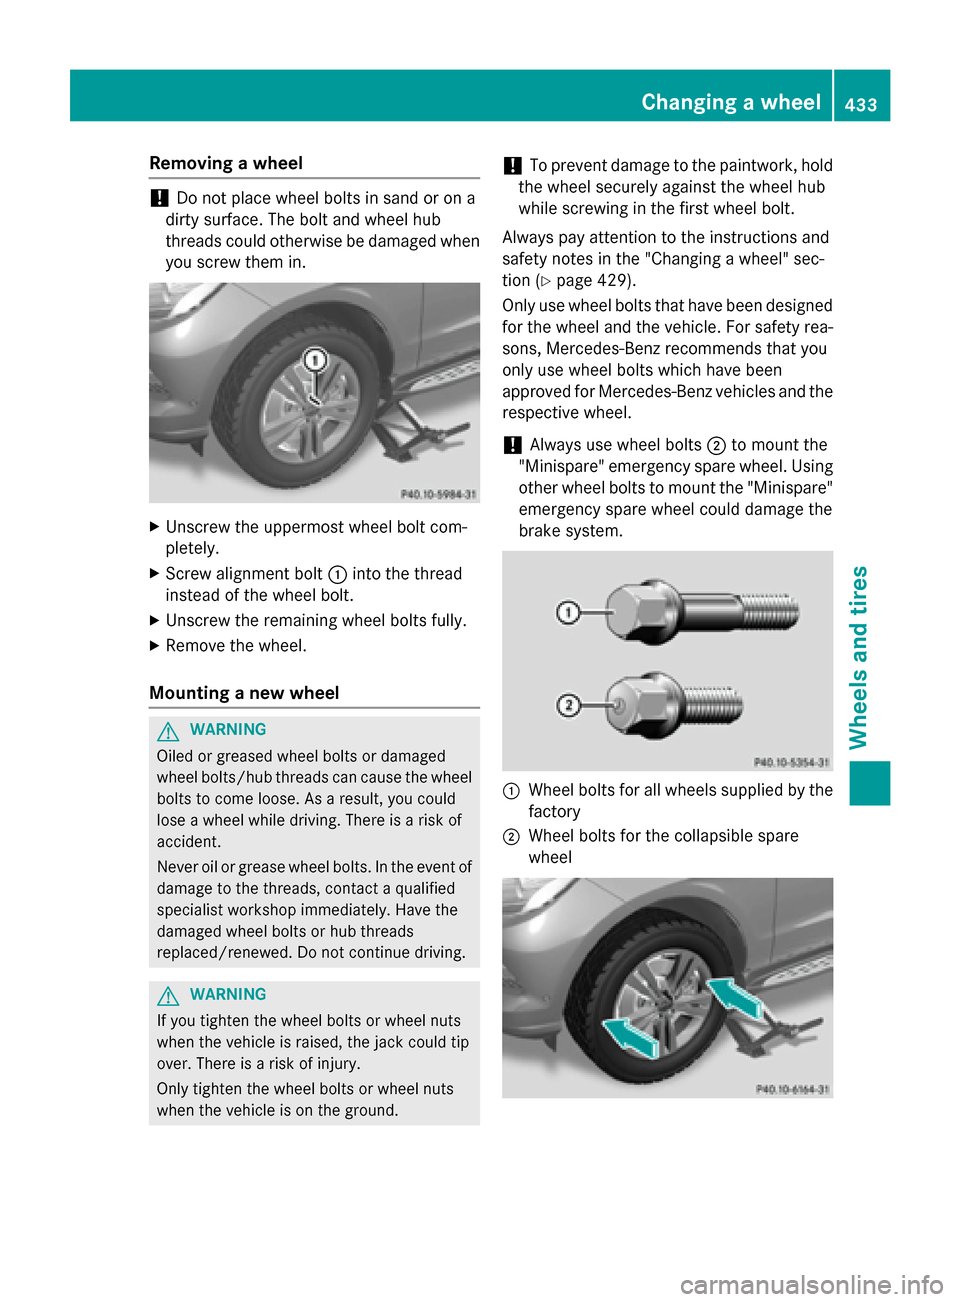 MERCEDES-BENZ GL-Class 2015 X166 Owners Manual Removing a wheel
!
Do not place wheel bolts in sand or on a
dirty surface. The bolt and wheel hub
threads could otherwise be damaged when you screw them in. X
Unscrew the uppermost wheel bolt com-
ple